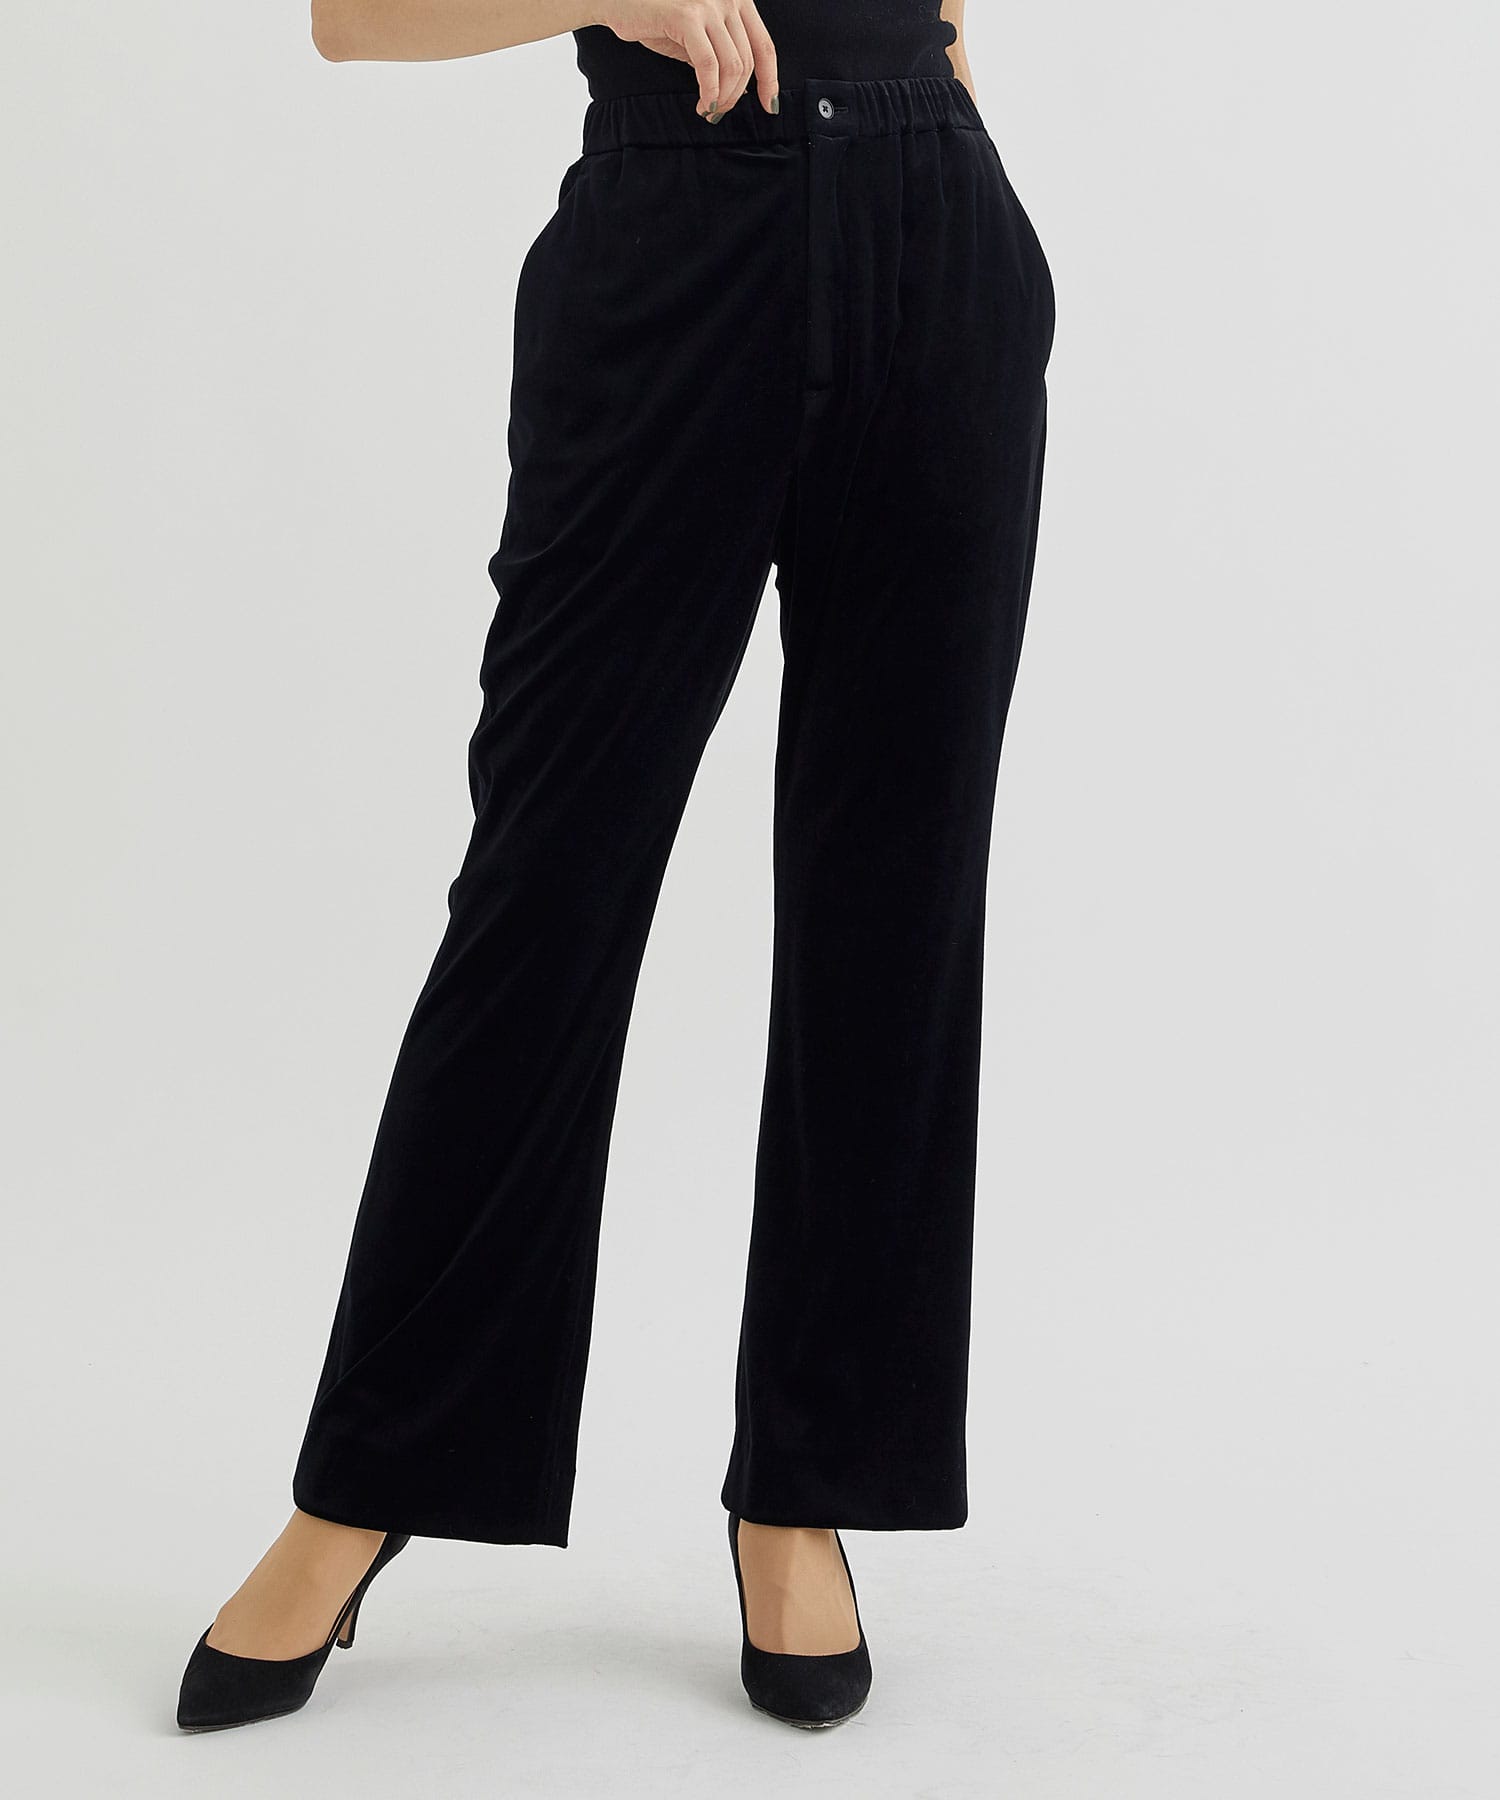 08sircus】Stretch velour flared pants | eclipseseal.com